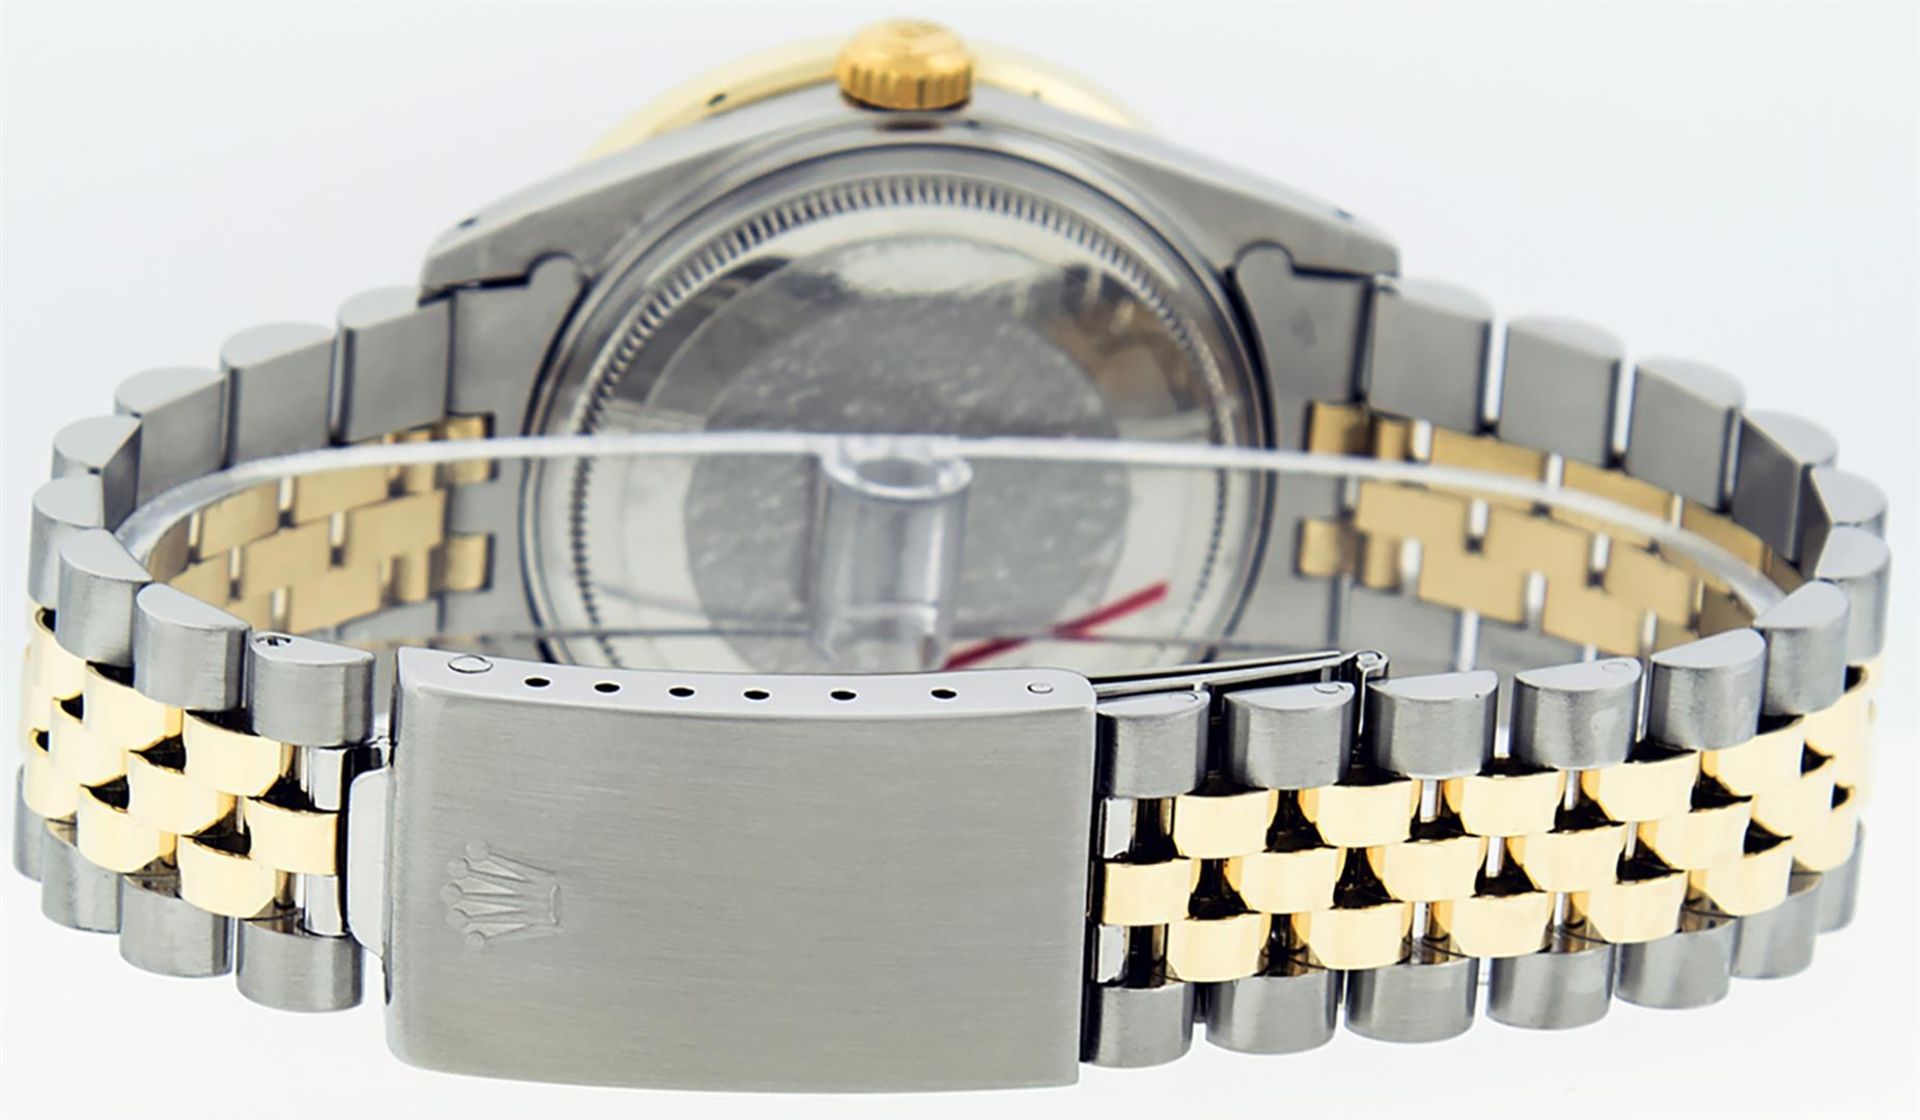 Rolex Mens 2 Tone Mother Of Pearl 3 ctw Channel Set Diamond Datejust Wristwatch - Image 6 of 9